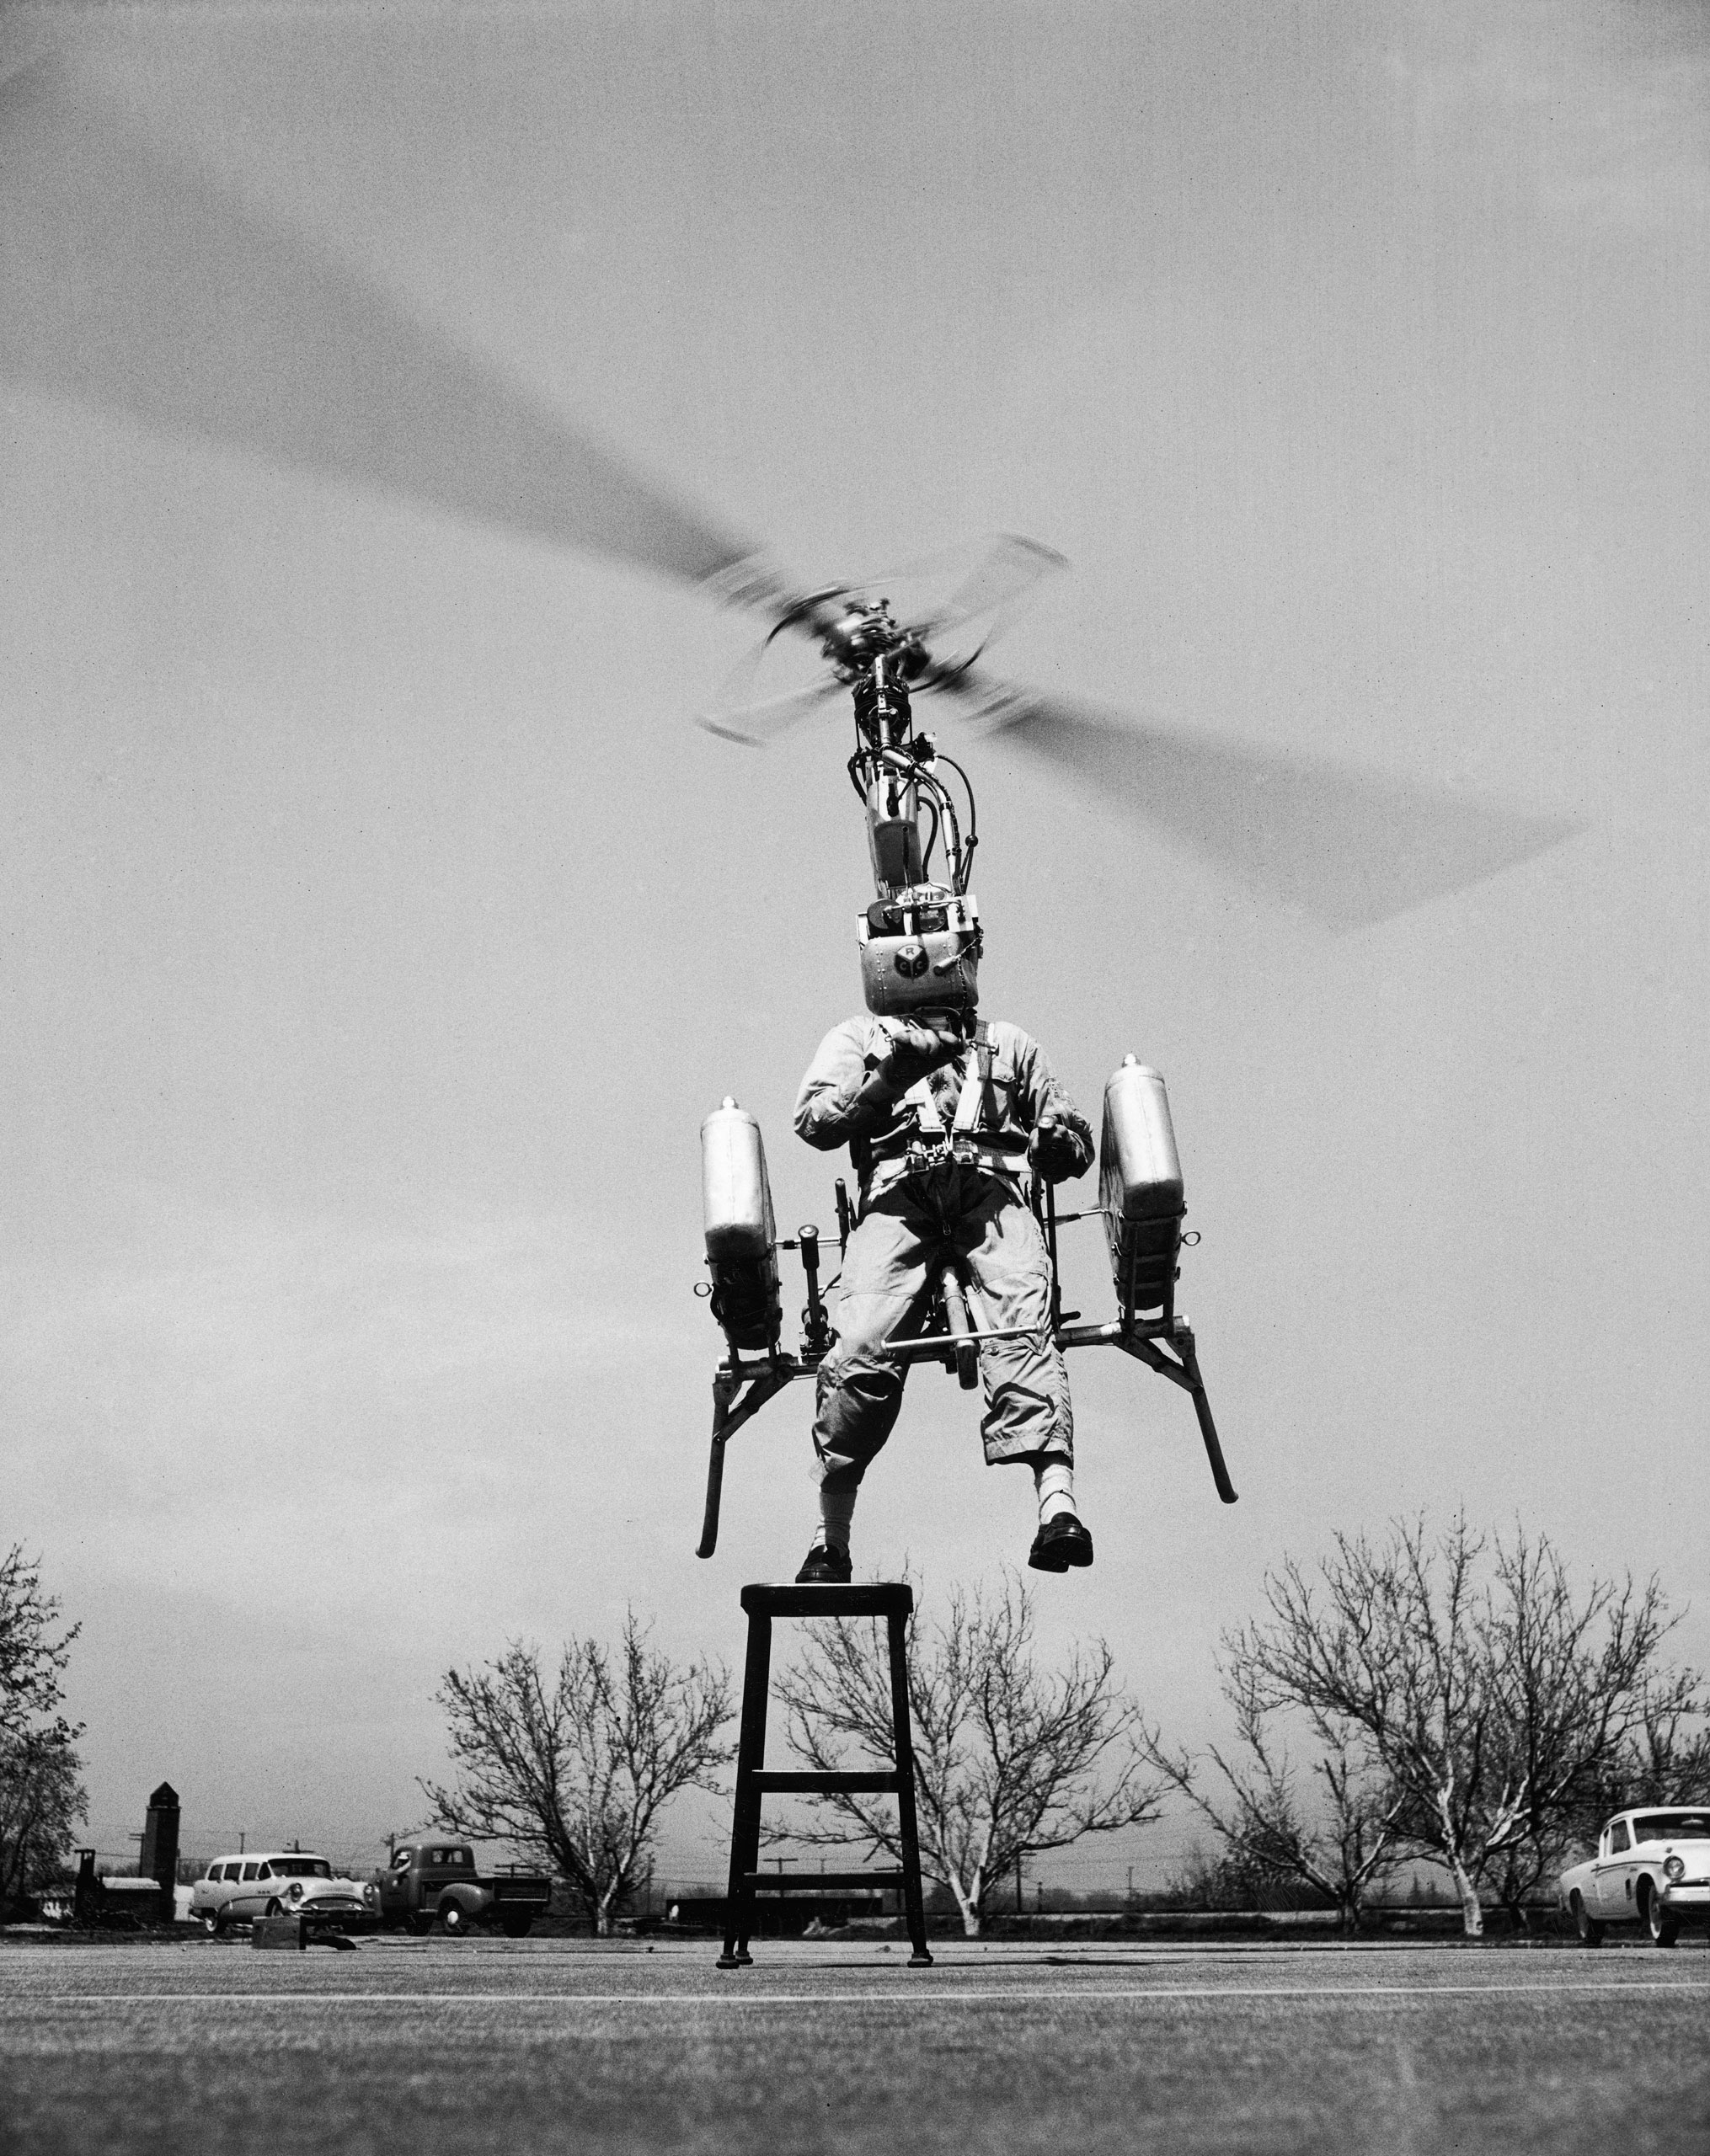 Test flight of the "strap-on" helicopter, 1957.